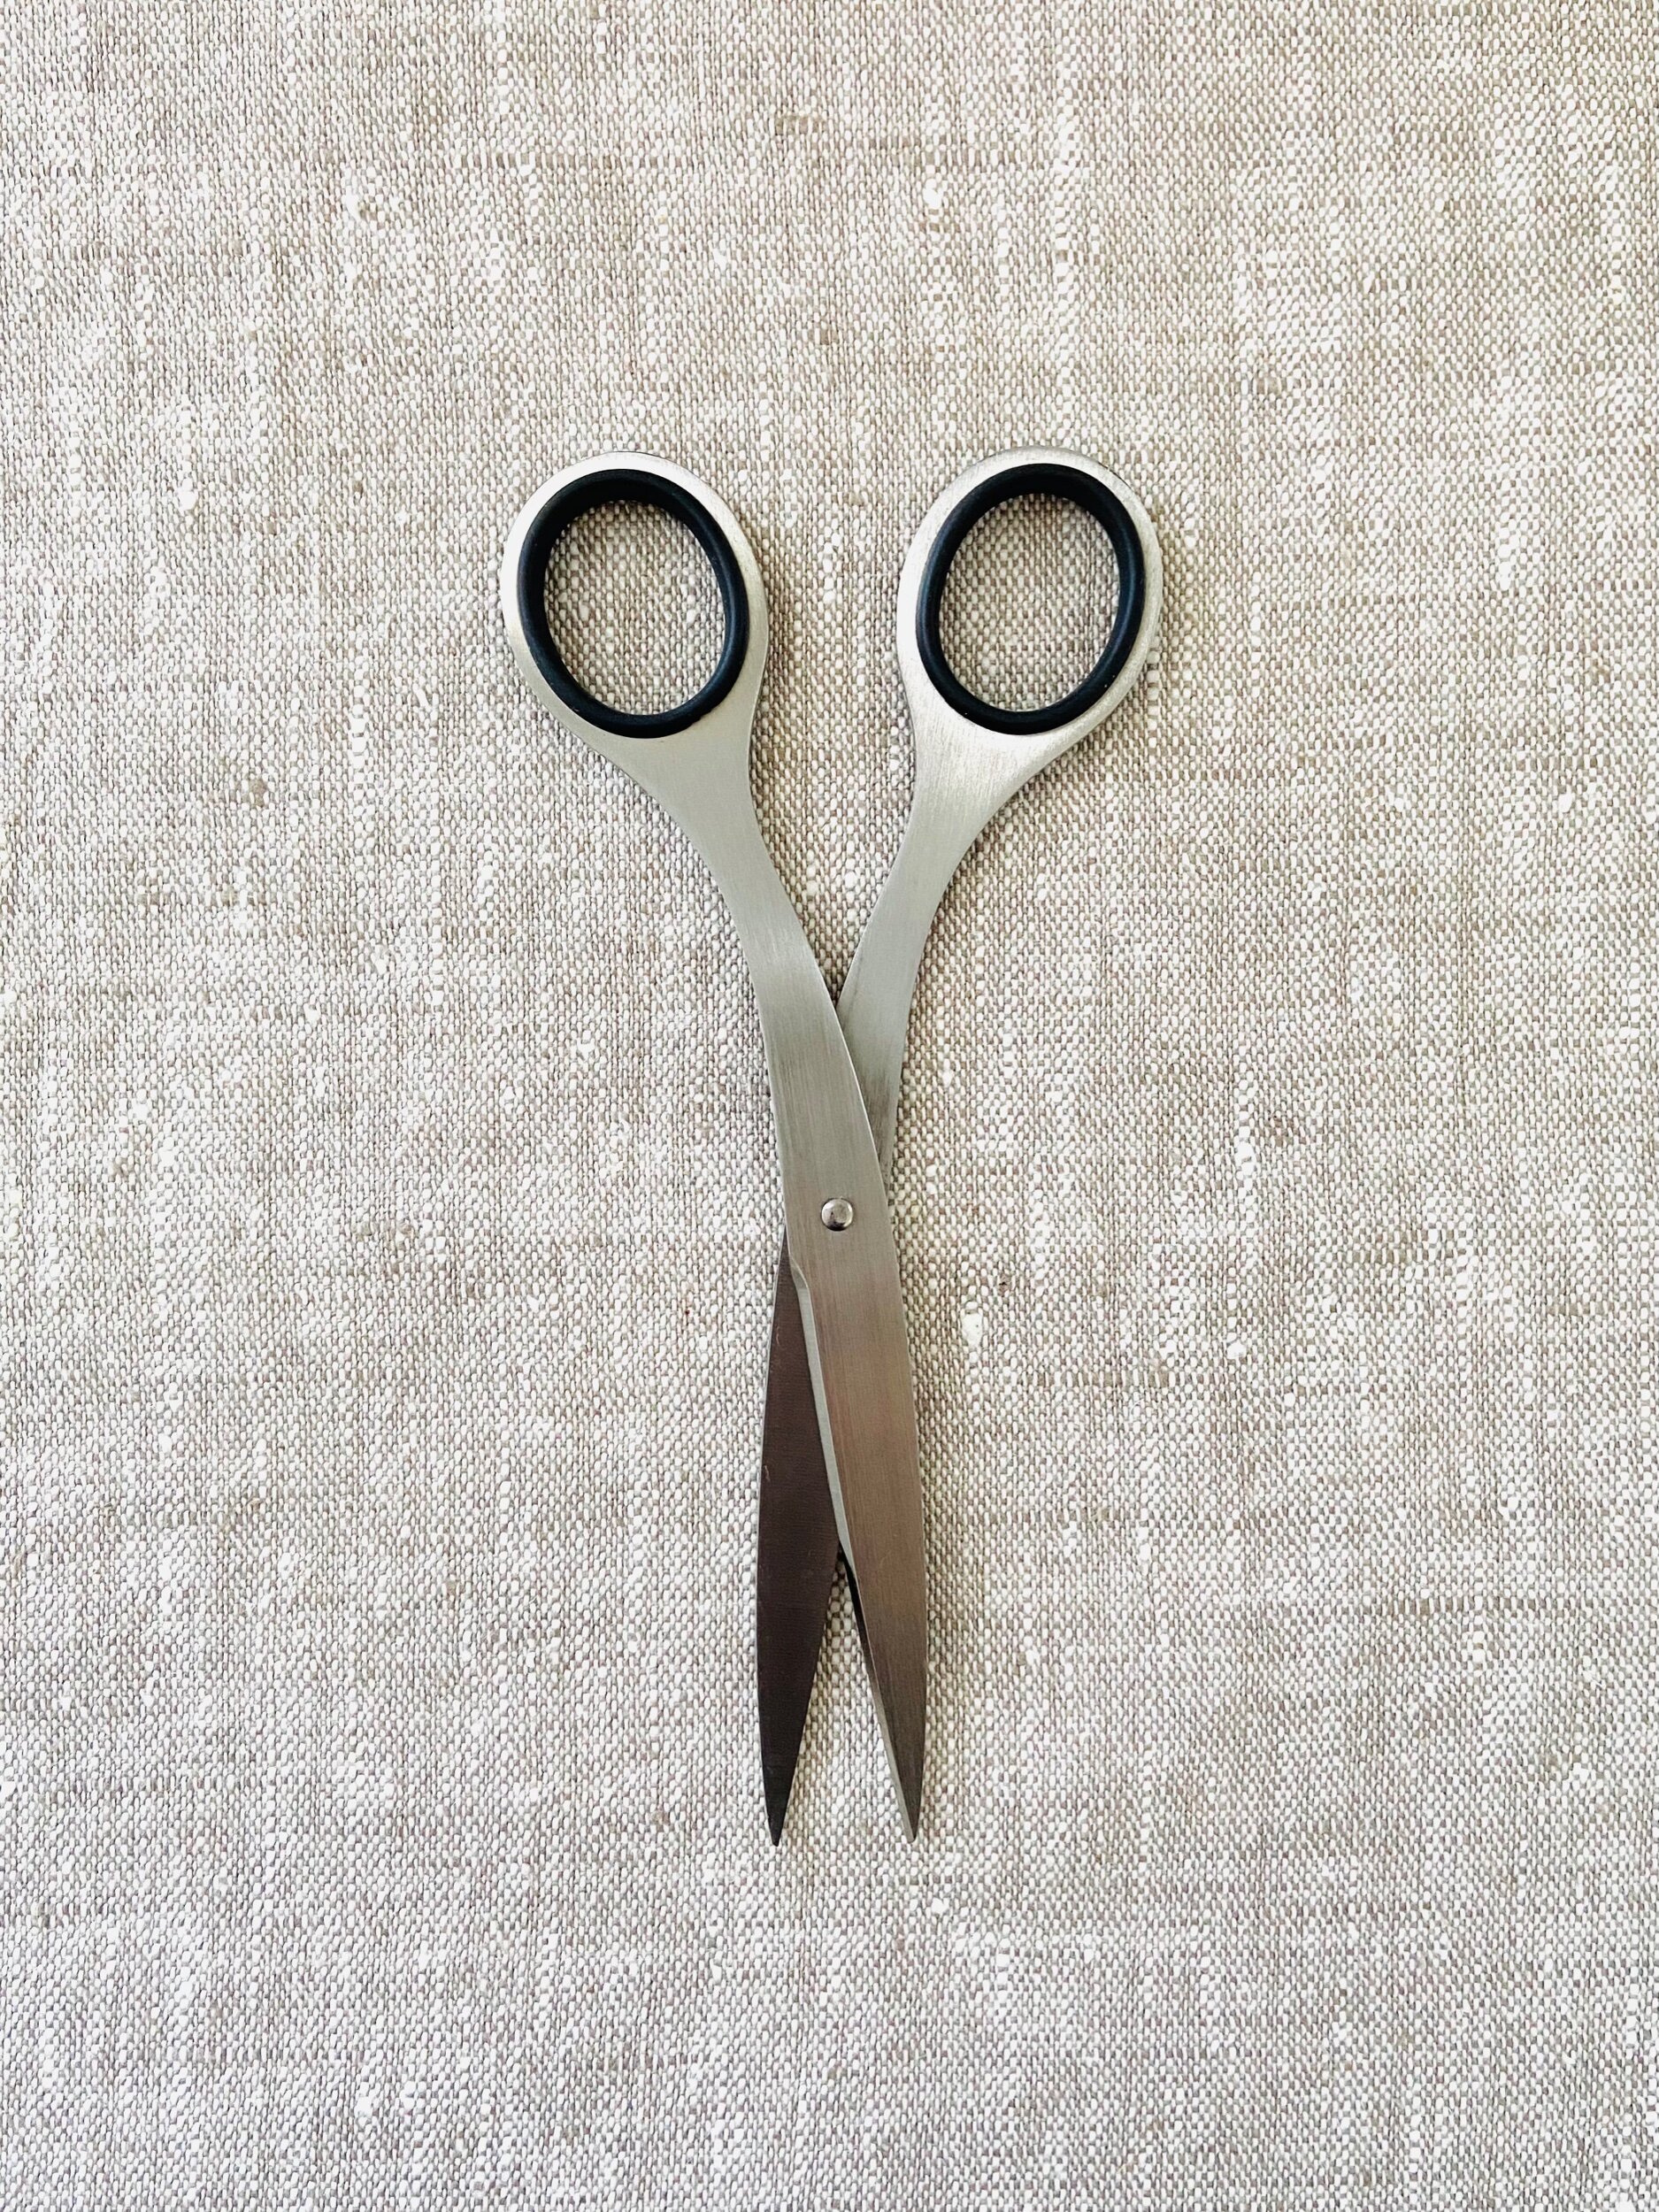 ALLEX Left Handed Scissors Adult Large 8 Inch, All Purpose Heavy